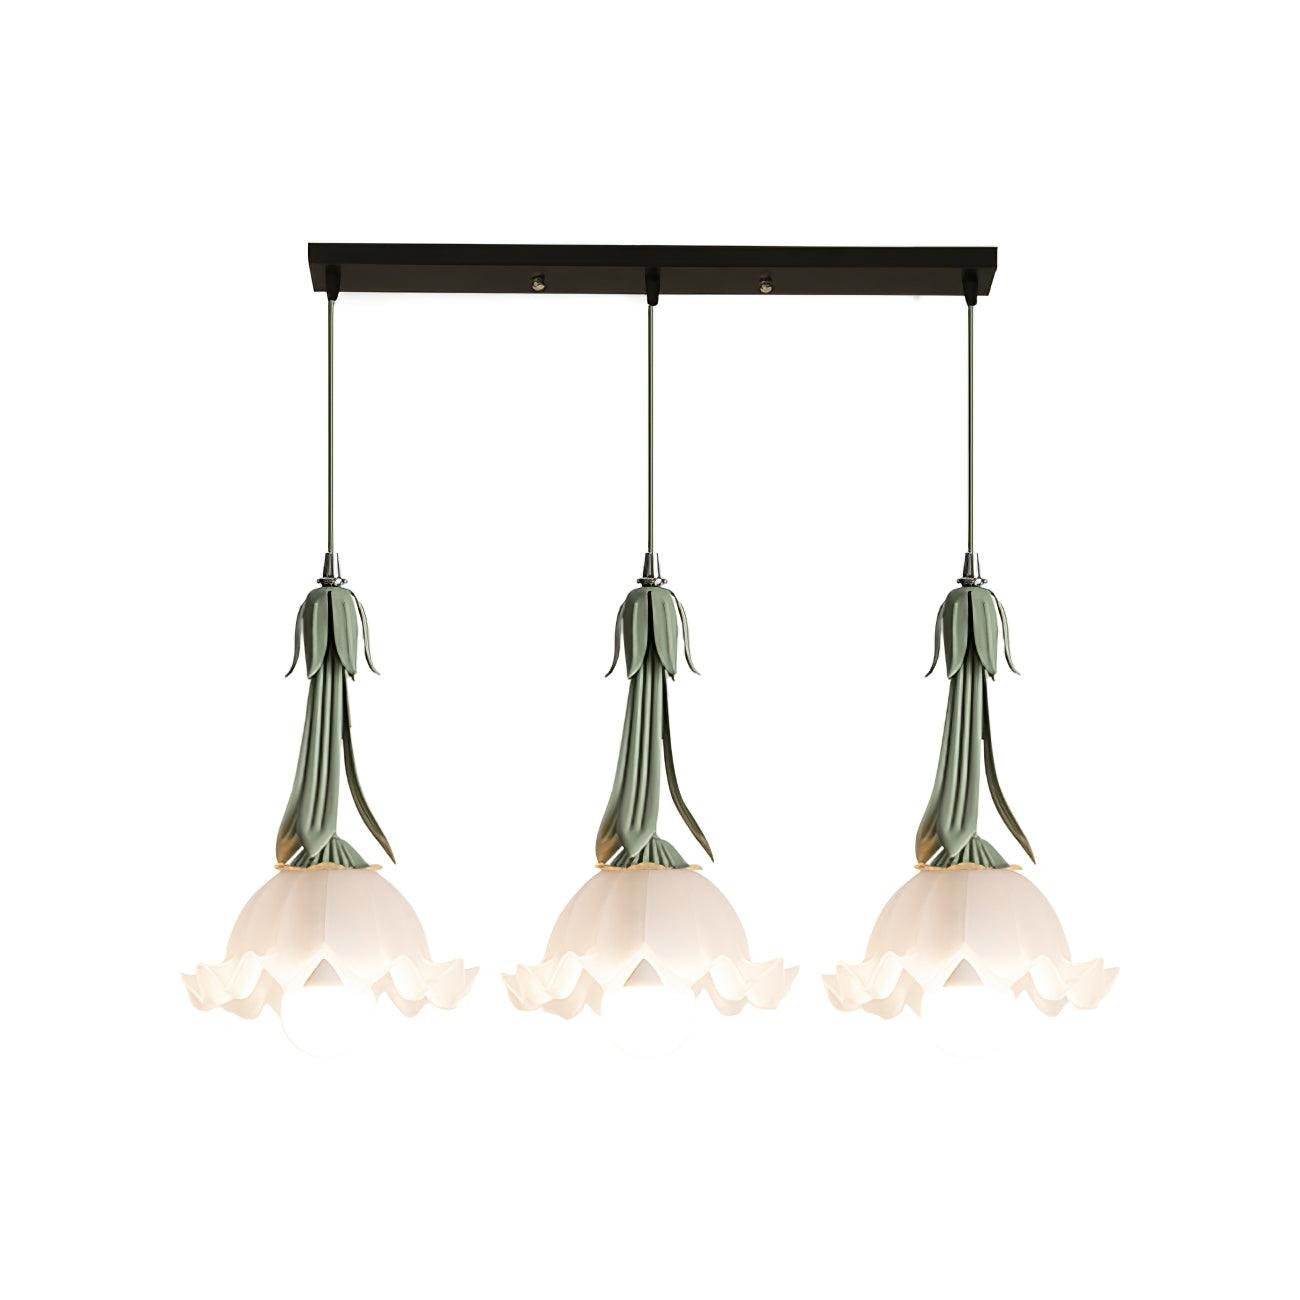 Black and Green+White Lily of the Valley Pendant Light, measuring ∅ 23.6″ x H 59″ or Dia 60cm x H 150cm.